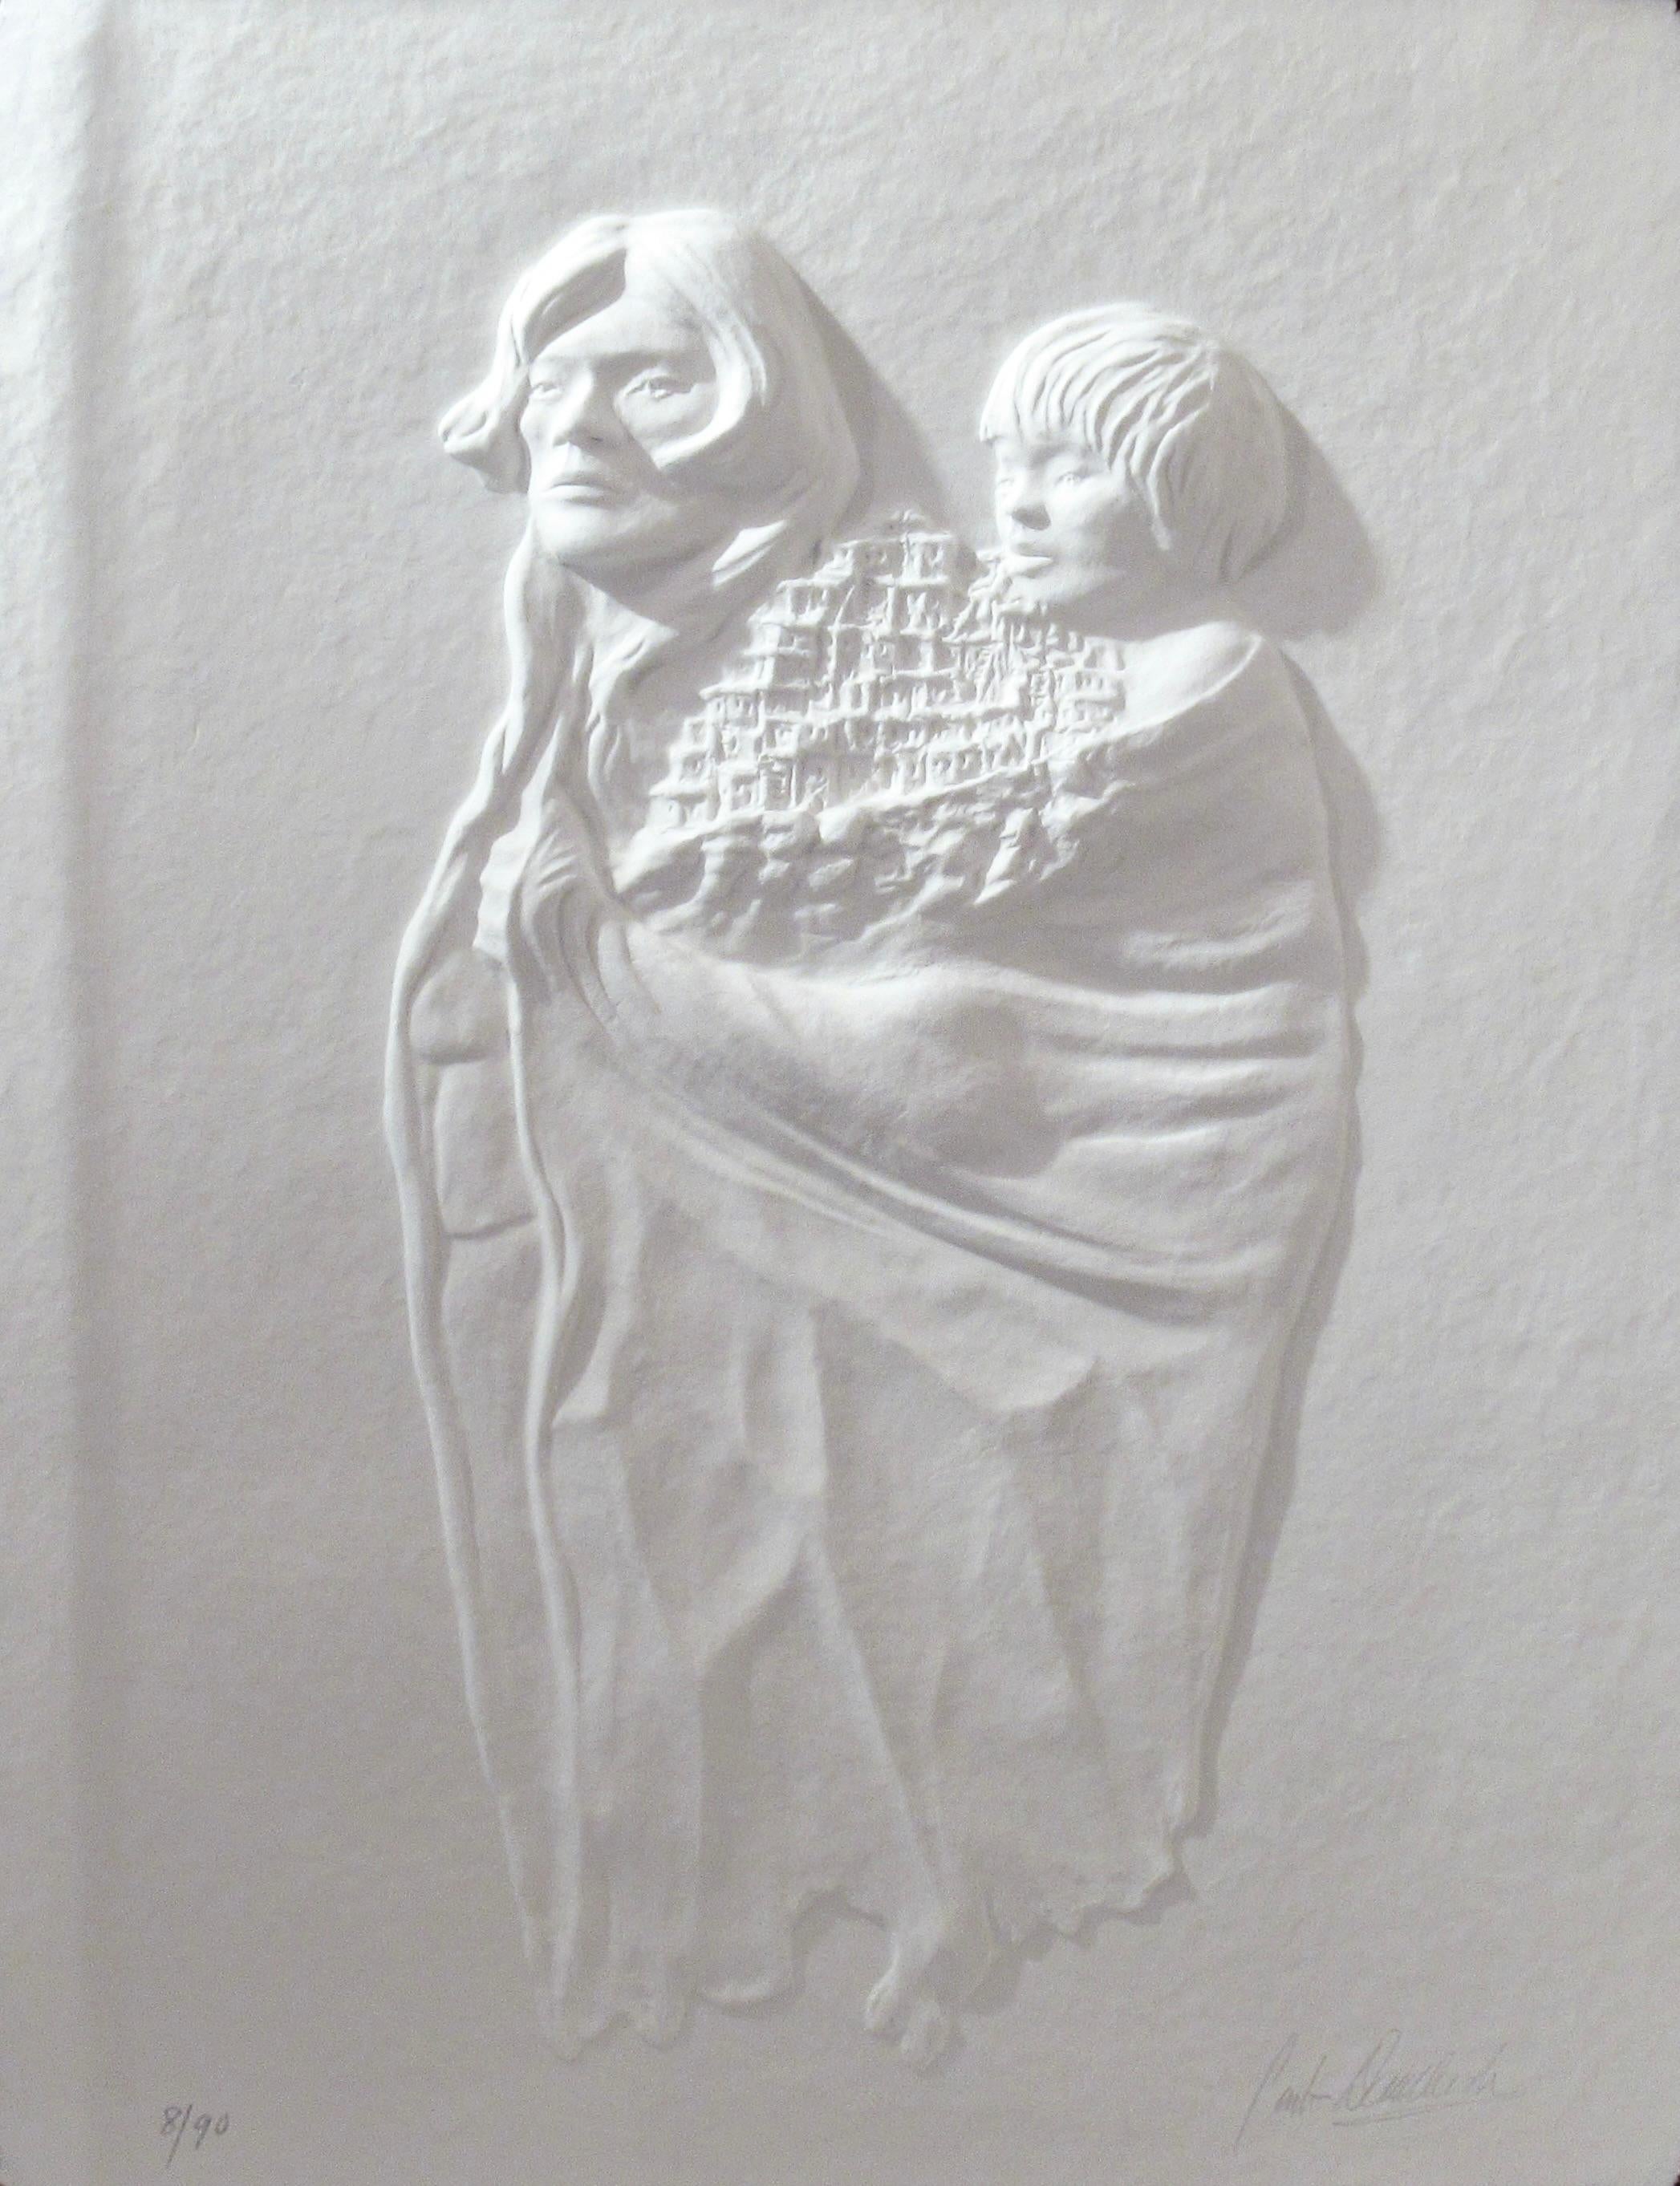 Native American Indian Woman and Baby - Sculpture by Carlo Wahlbeck